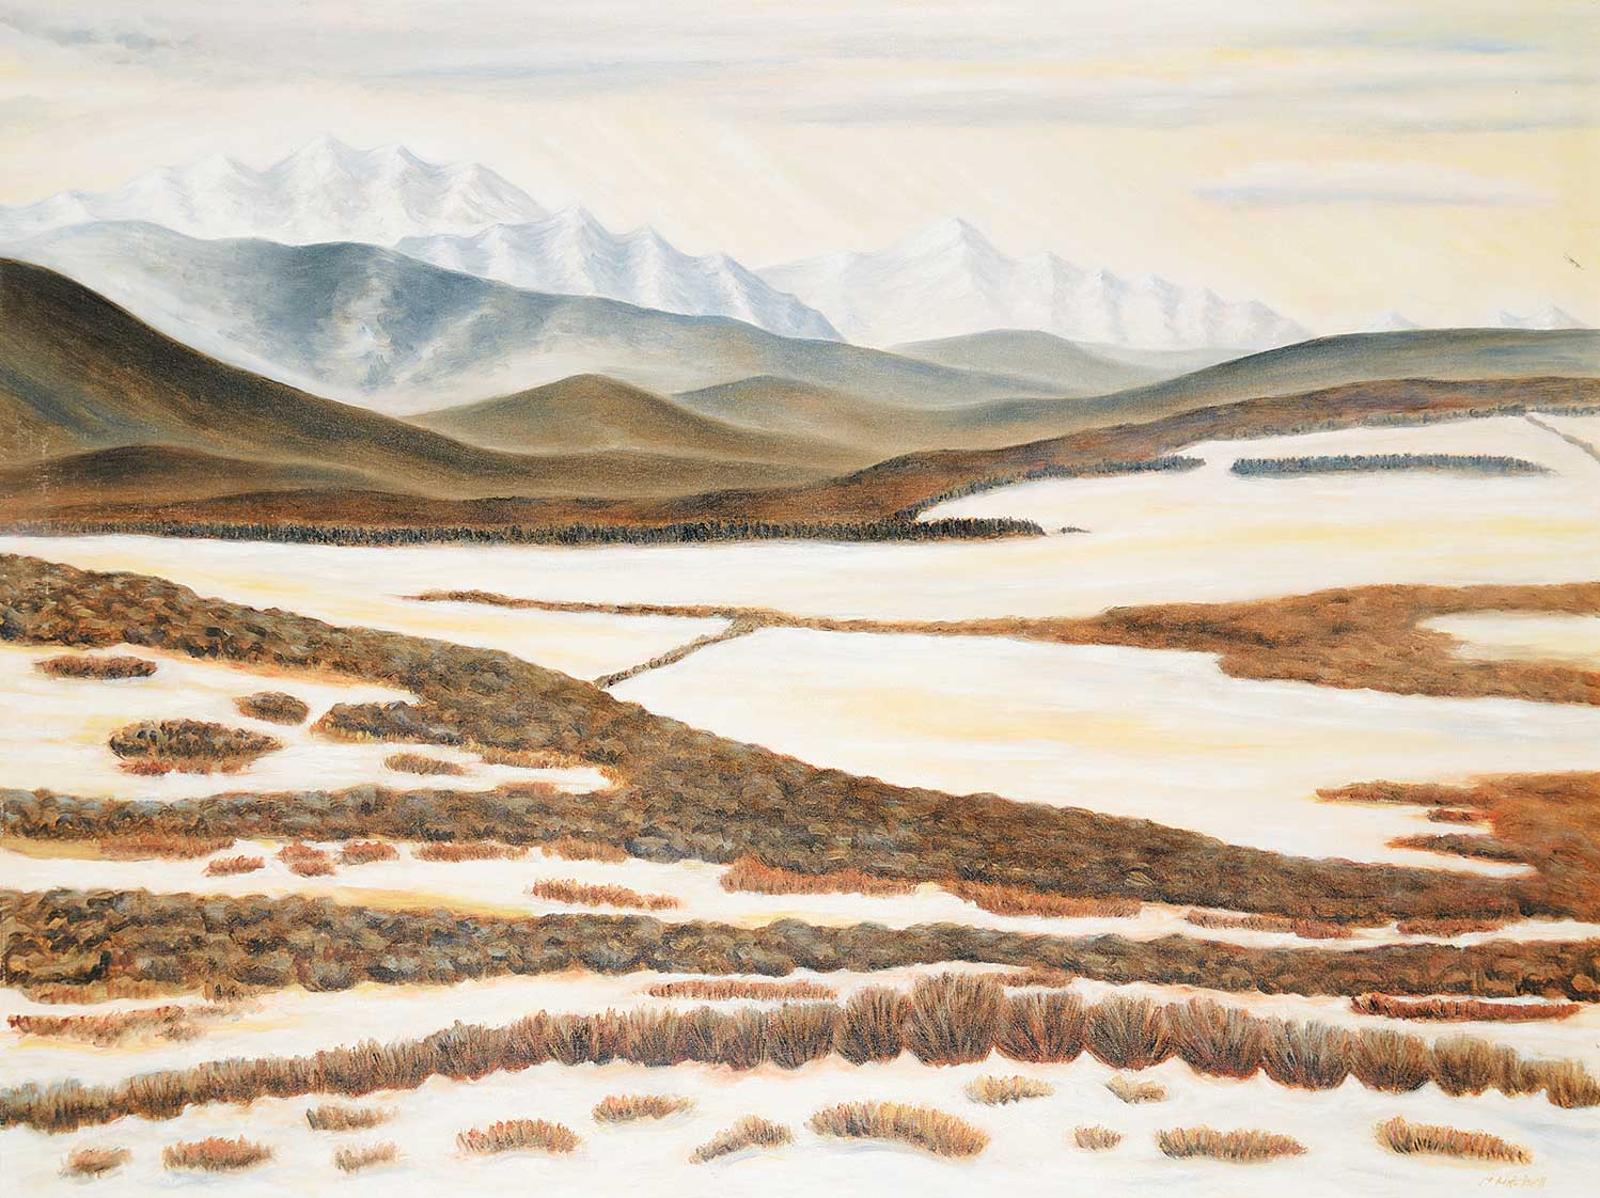 C. Mitchell - Untitled - Winter in the Foothills